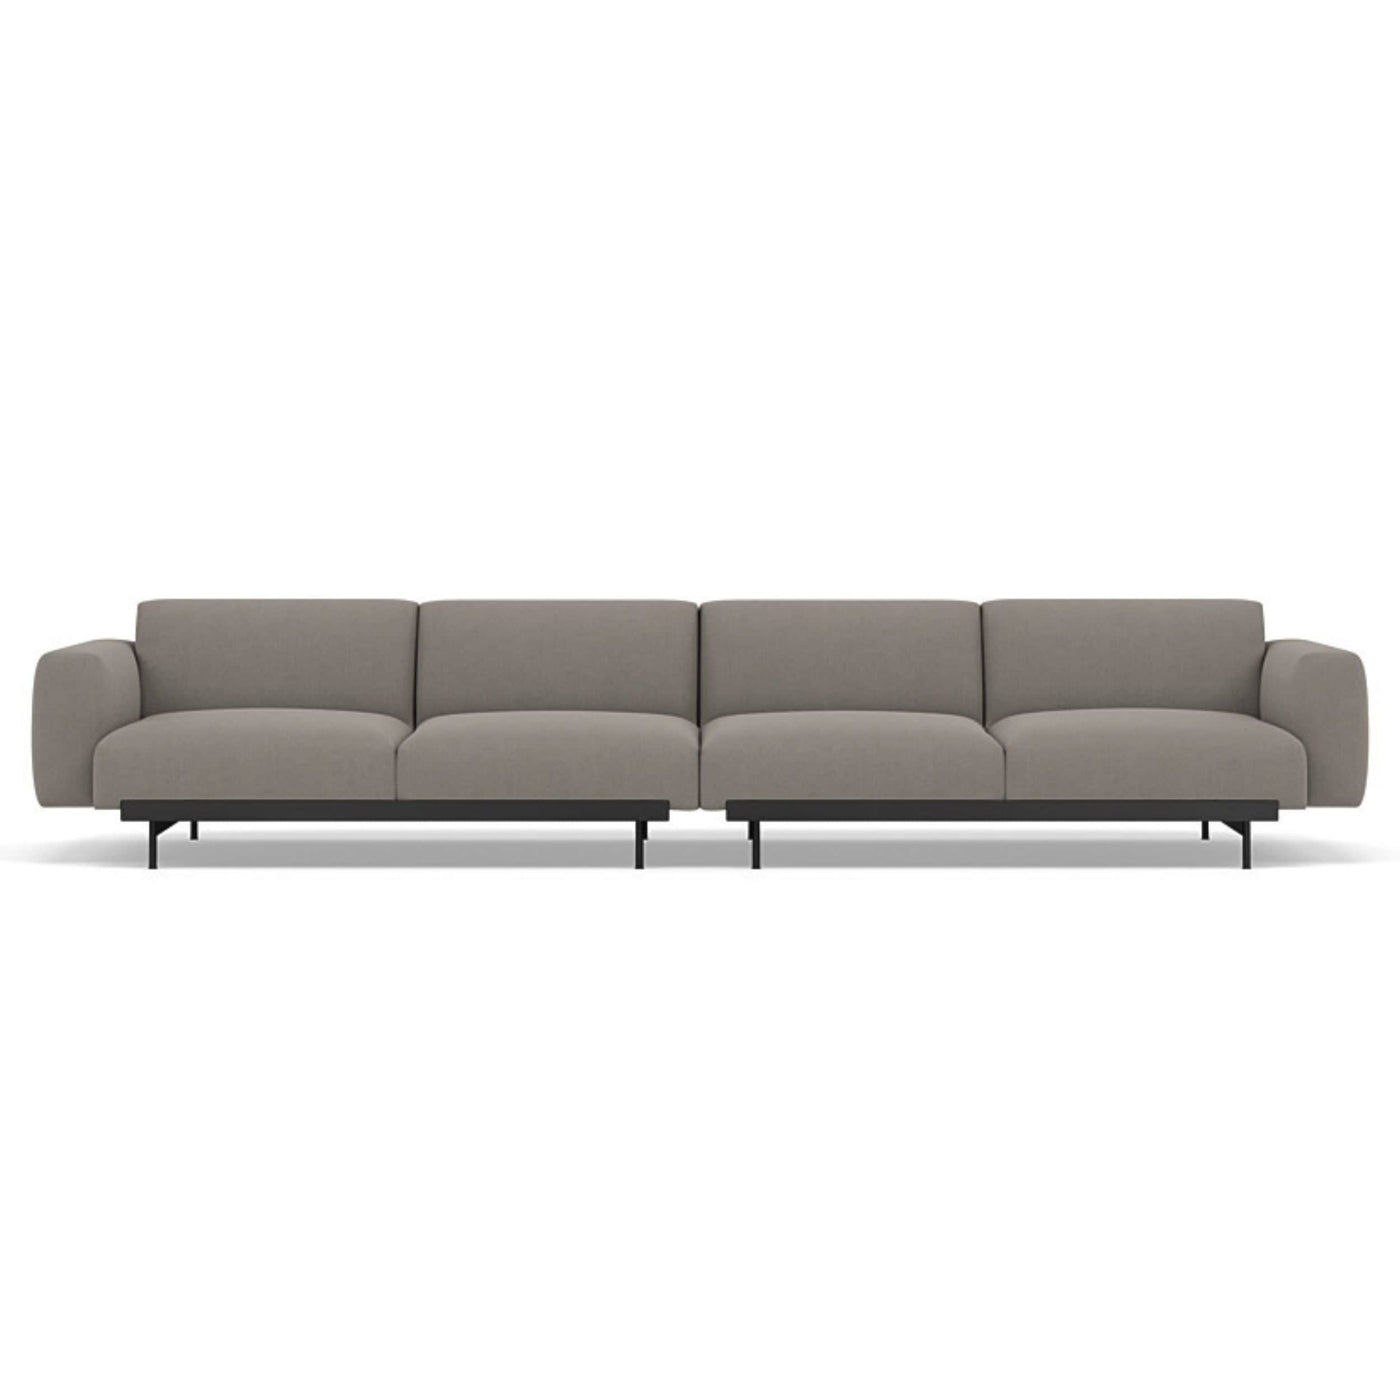 Muuto In Situ Modular 4 Seater Sofa configuration 1 in fiord 262. Made to order from someday designs. #colour_fiord-262